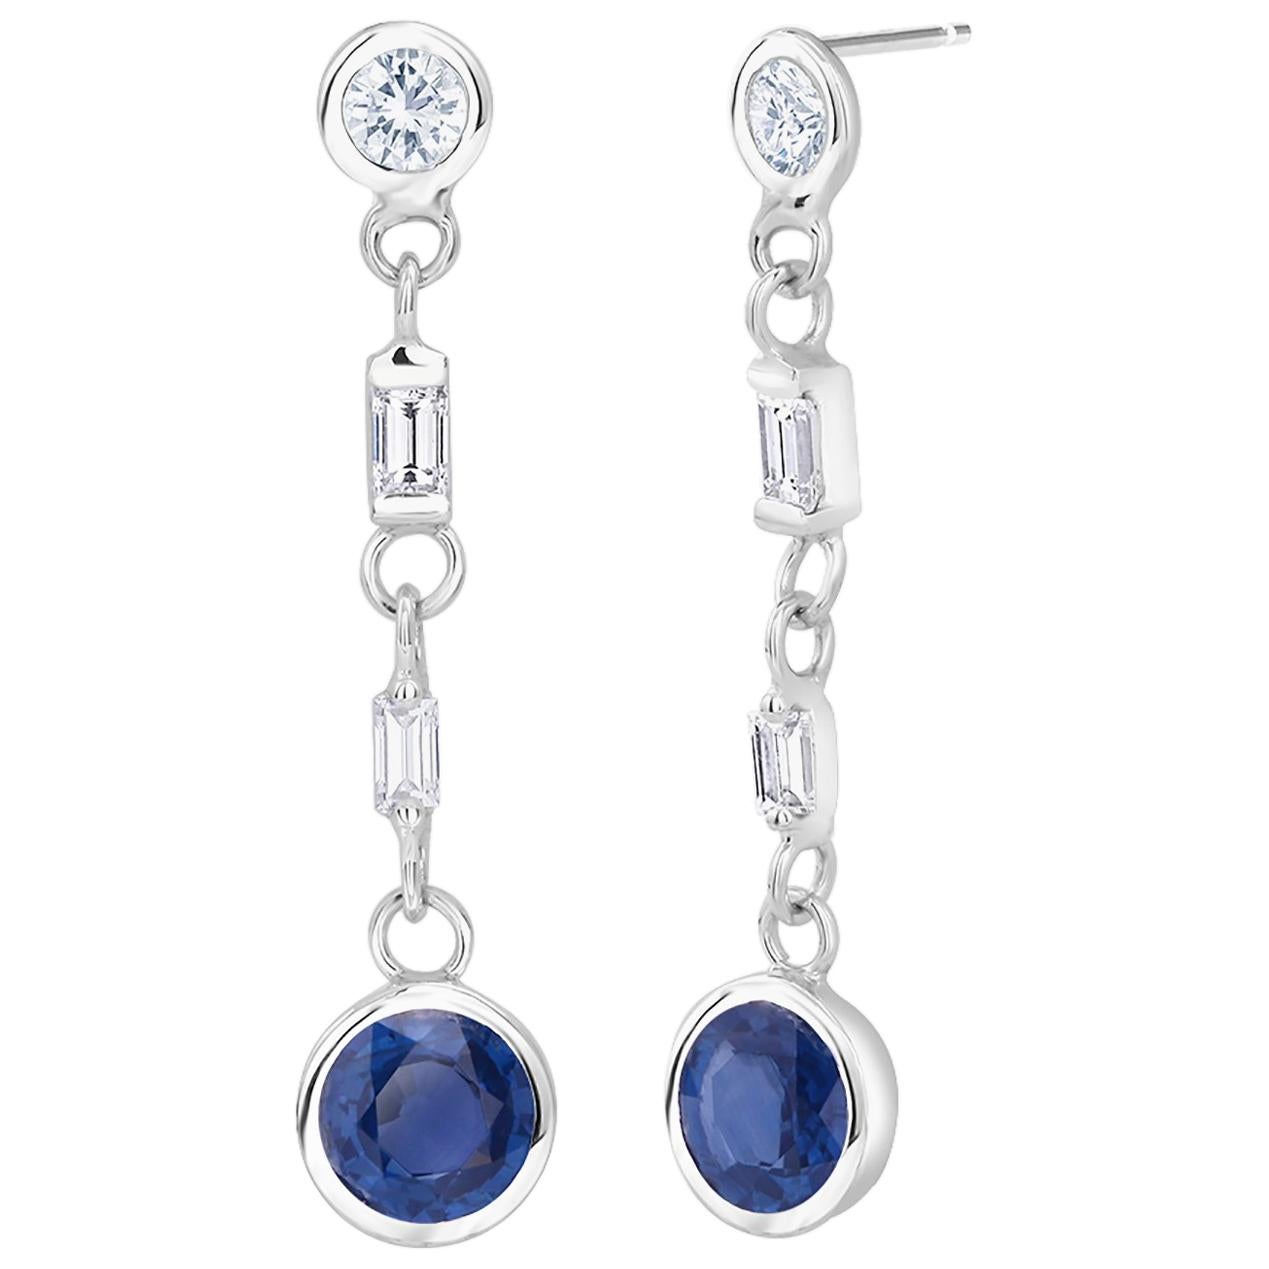 Round Sapphire and Baguette Diamond Gold Earrings Weighing 2.30 Carat